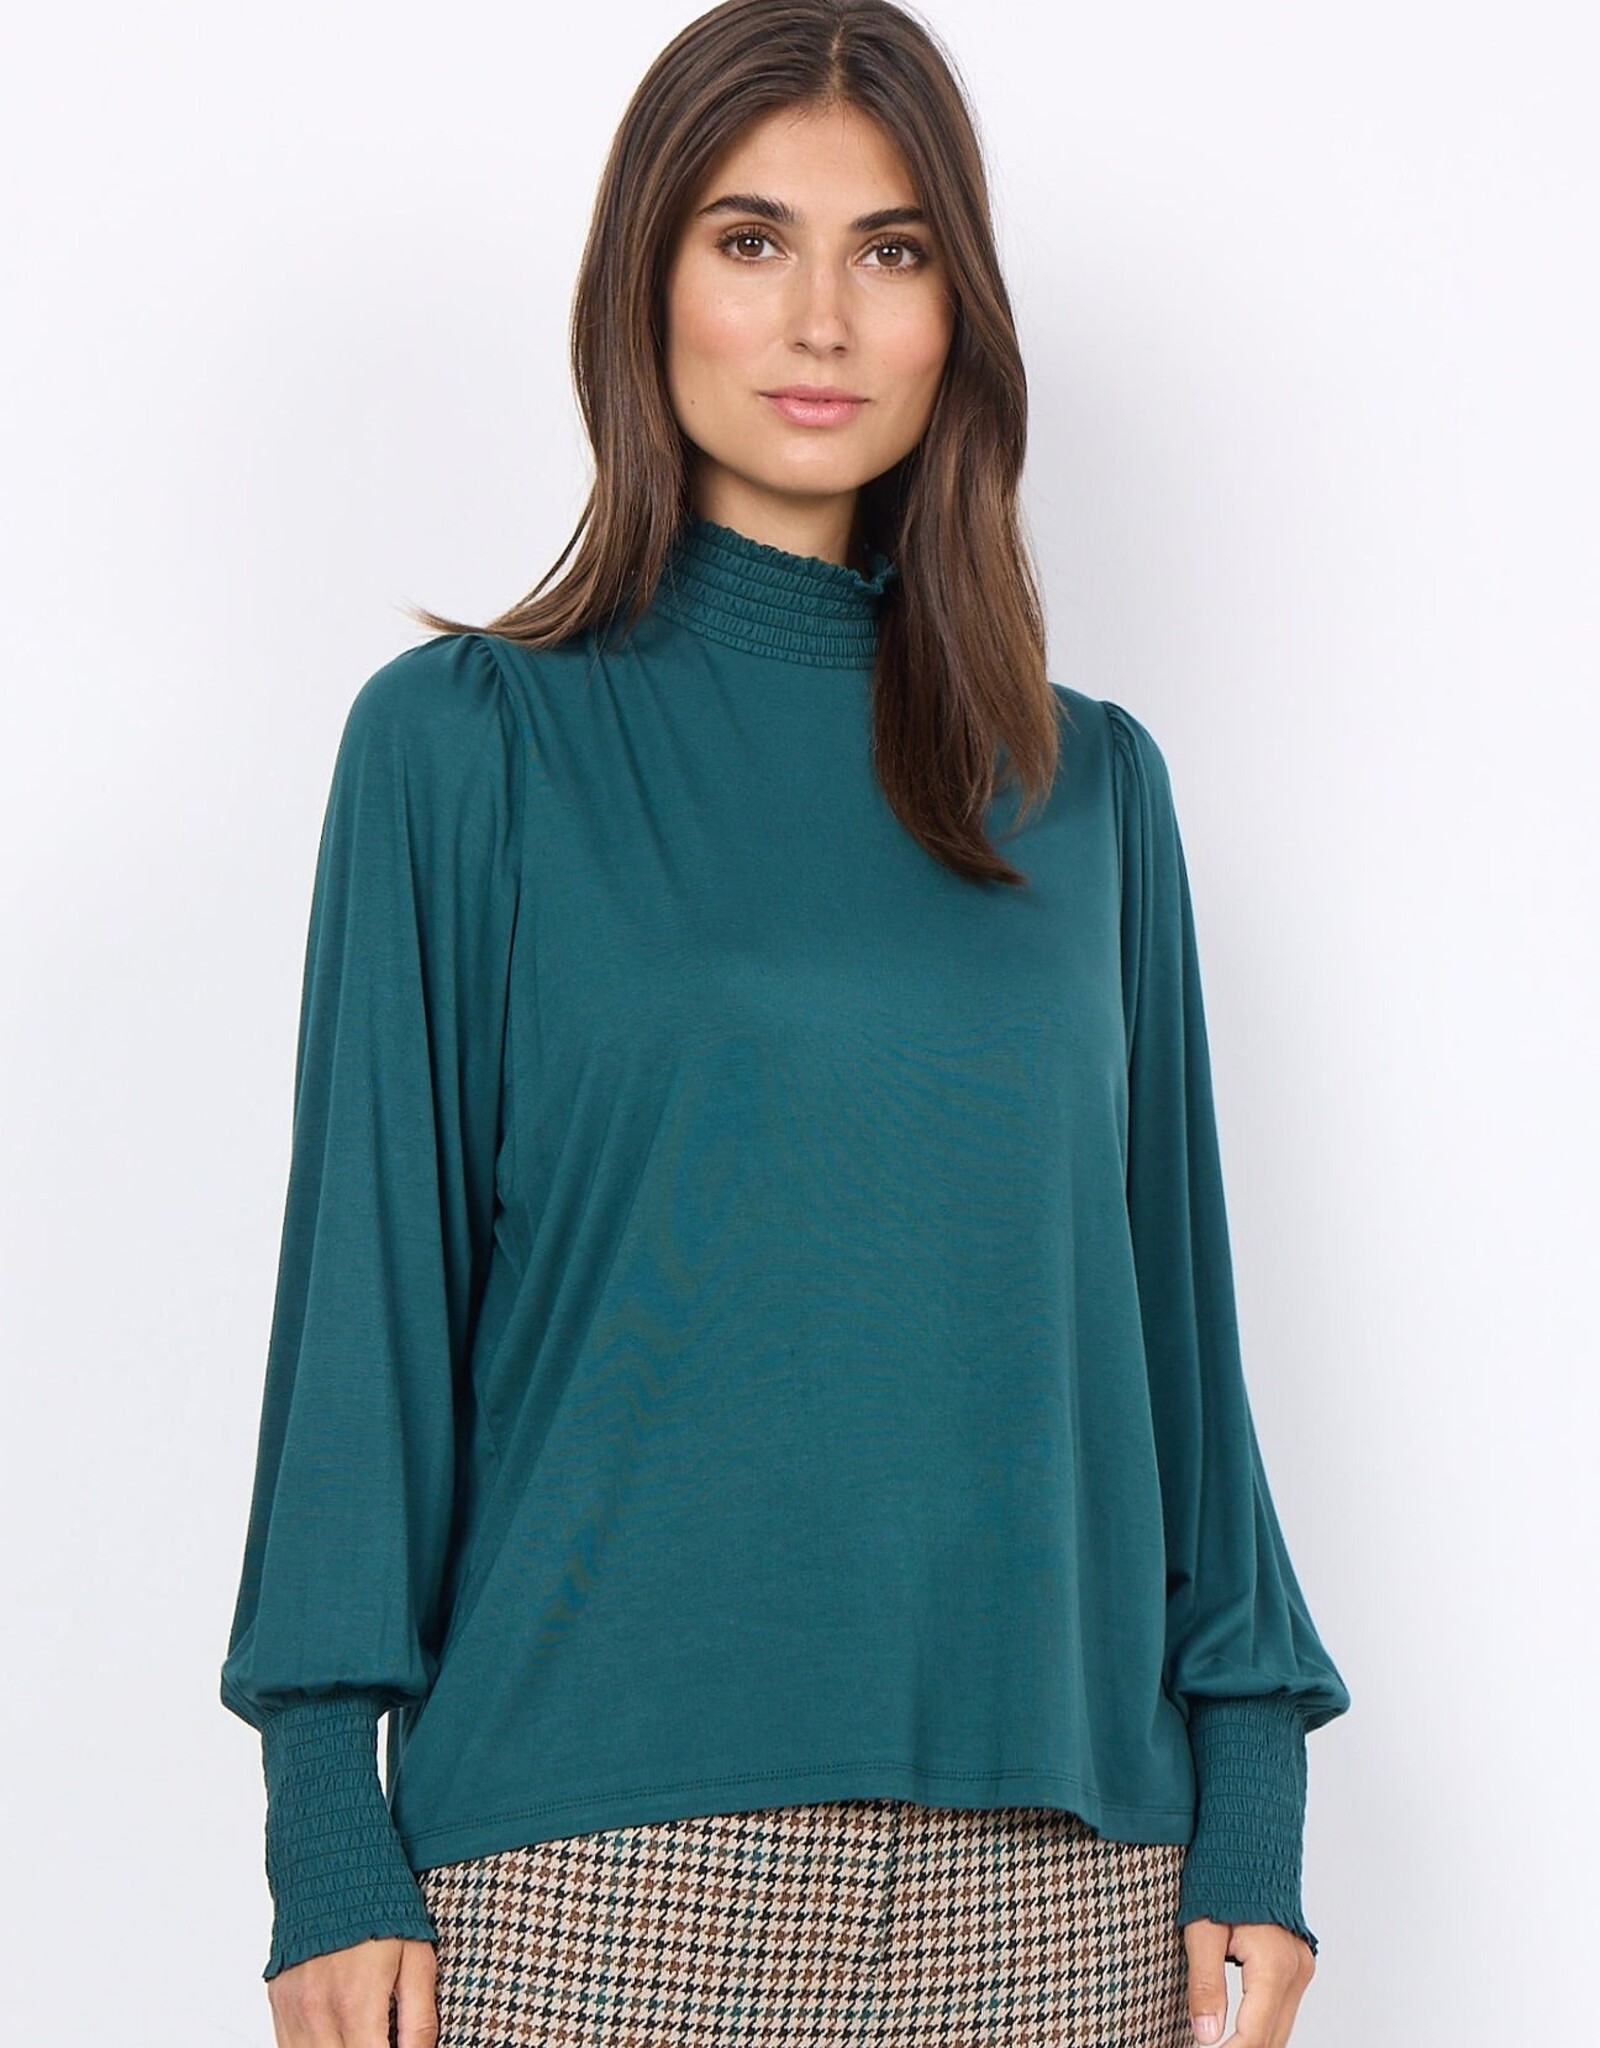 Soya Concept Soya Concept - FW23 26291 Ladies Knitted Top